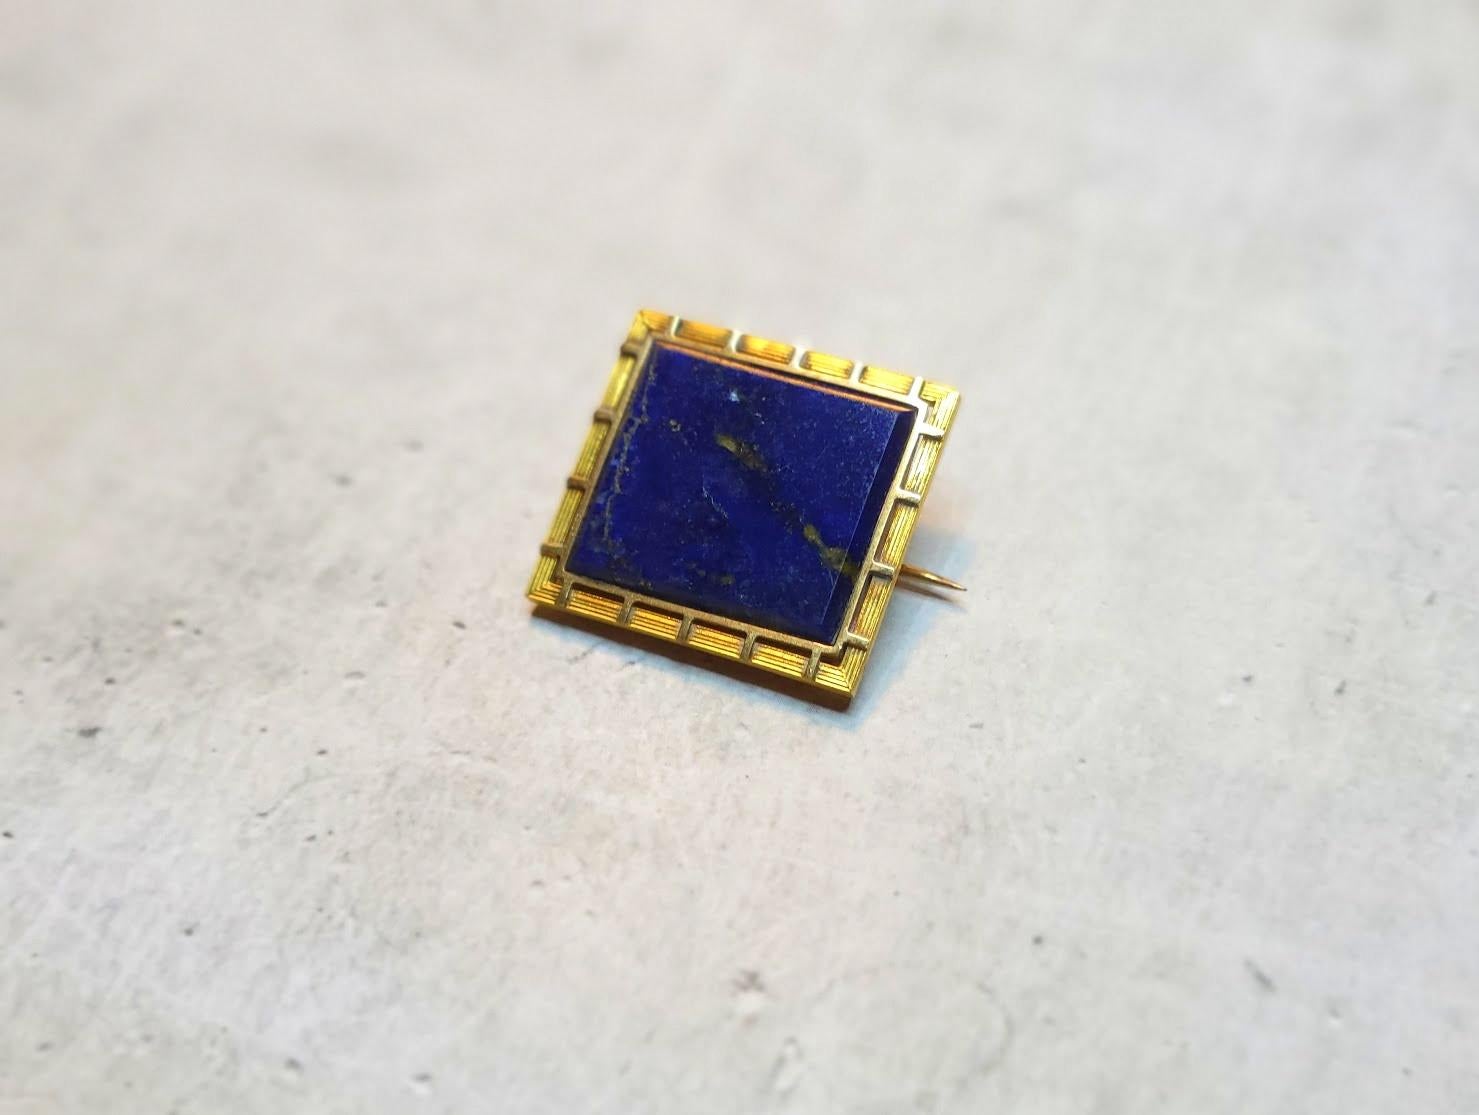 This vintage 9K gold brooch in Art Deco Style approx 1920-1930.

The brooch is approximately 23.8mm x 25.8mm.
Weight 5.5g
High quality dark blue lapis lazuli with gold pyrite.

On the back side of the brooch there are numbers: 1274 38. 
On the back